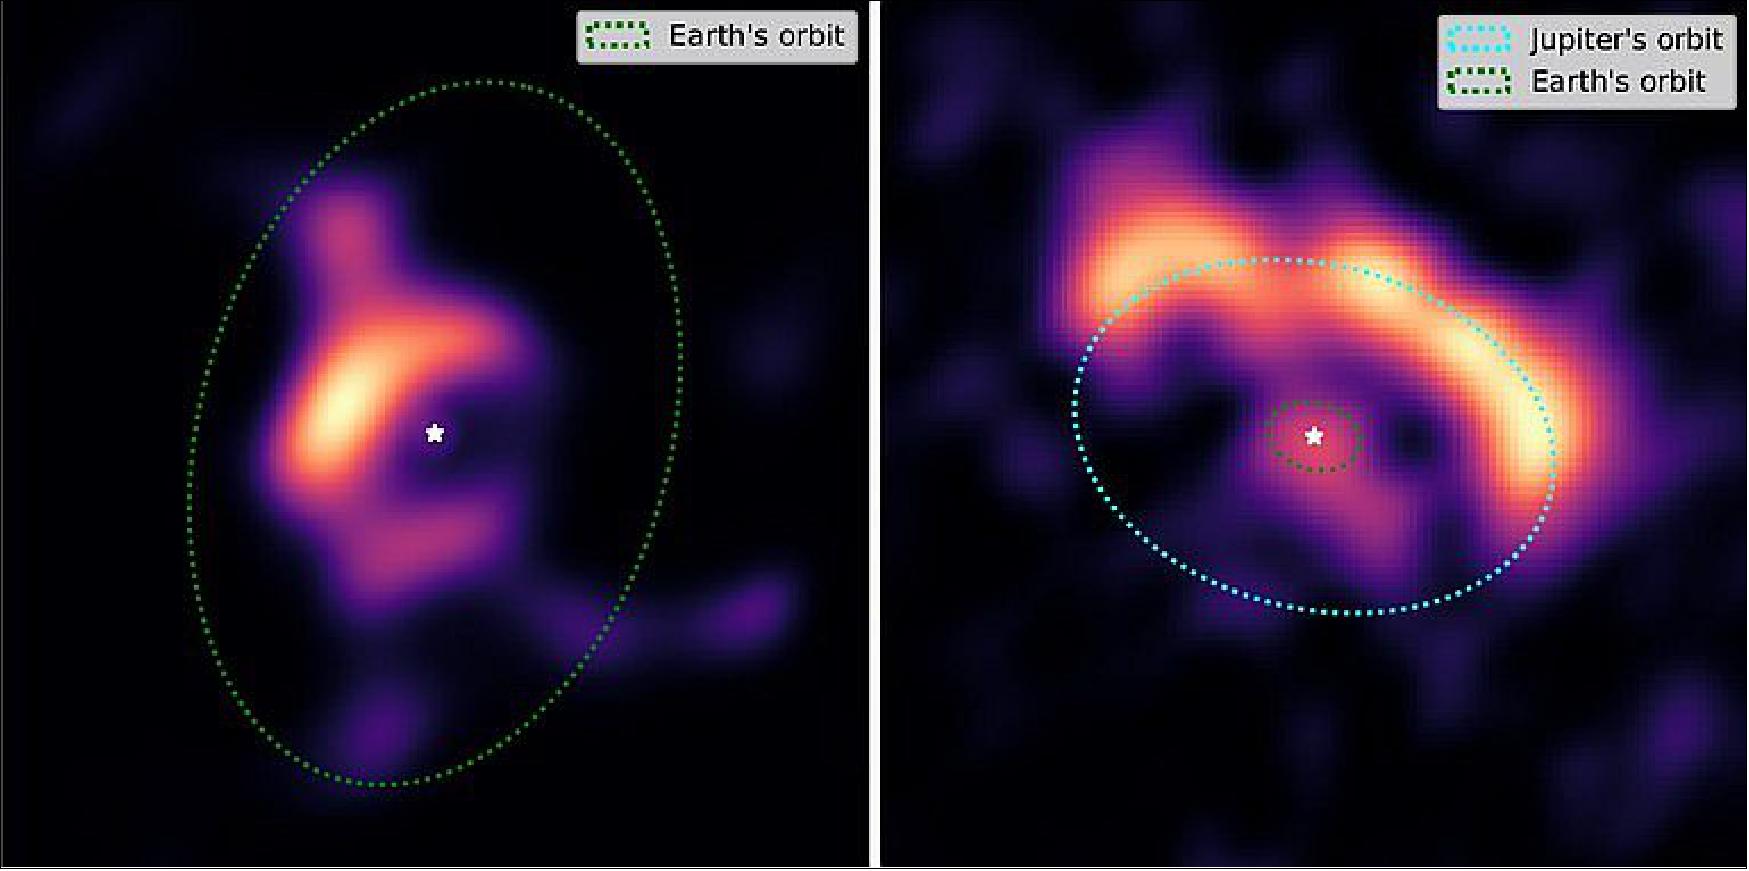 Figure 37: The protoplanetary disks around the R CrA (left) and HD45677 (right) stars, captured with ESO’s VLT (Very Large Telescope) Interferometer. The orbits are added for reference. The star serves the same purpose, since its light was filtered out to get a more detailed image of the disk (image credit: Jacques Kluska et al.)